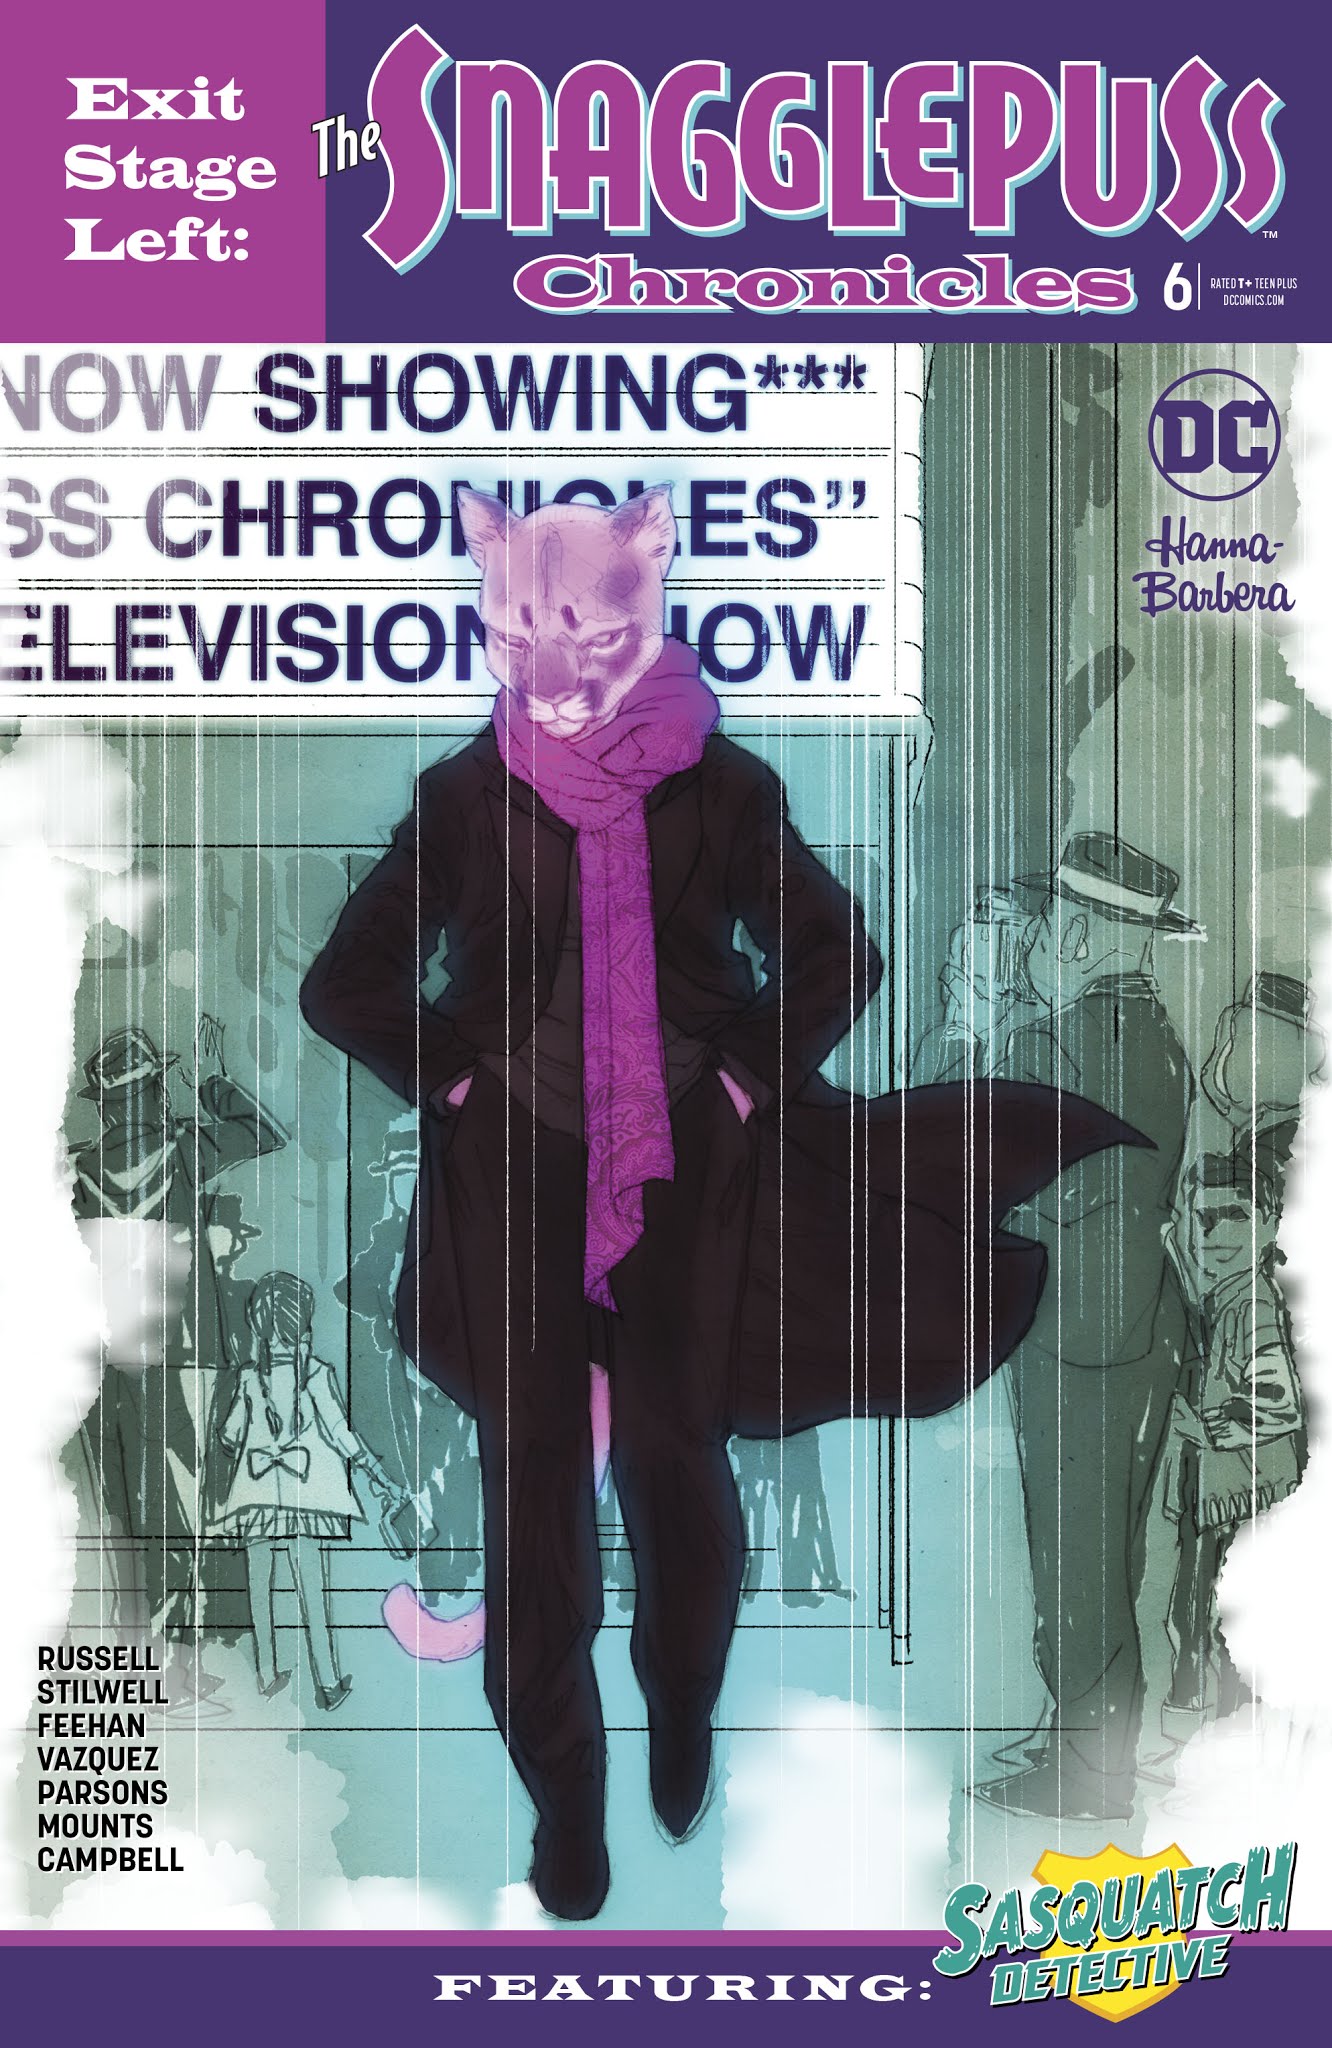 Read online Exit Stage Left: The Snagglepuss Chronicles comic -  Issue #6 - 1